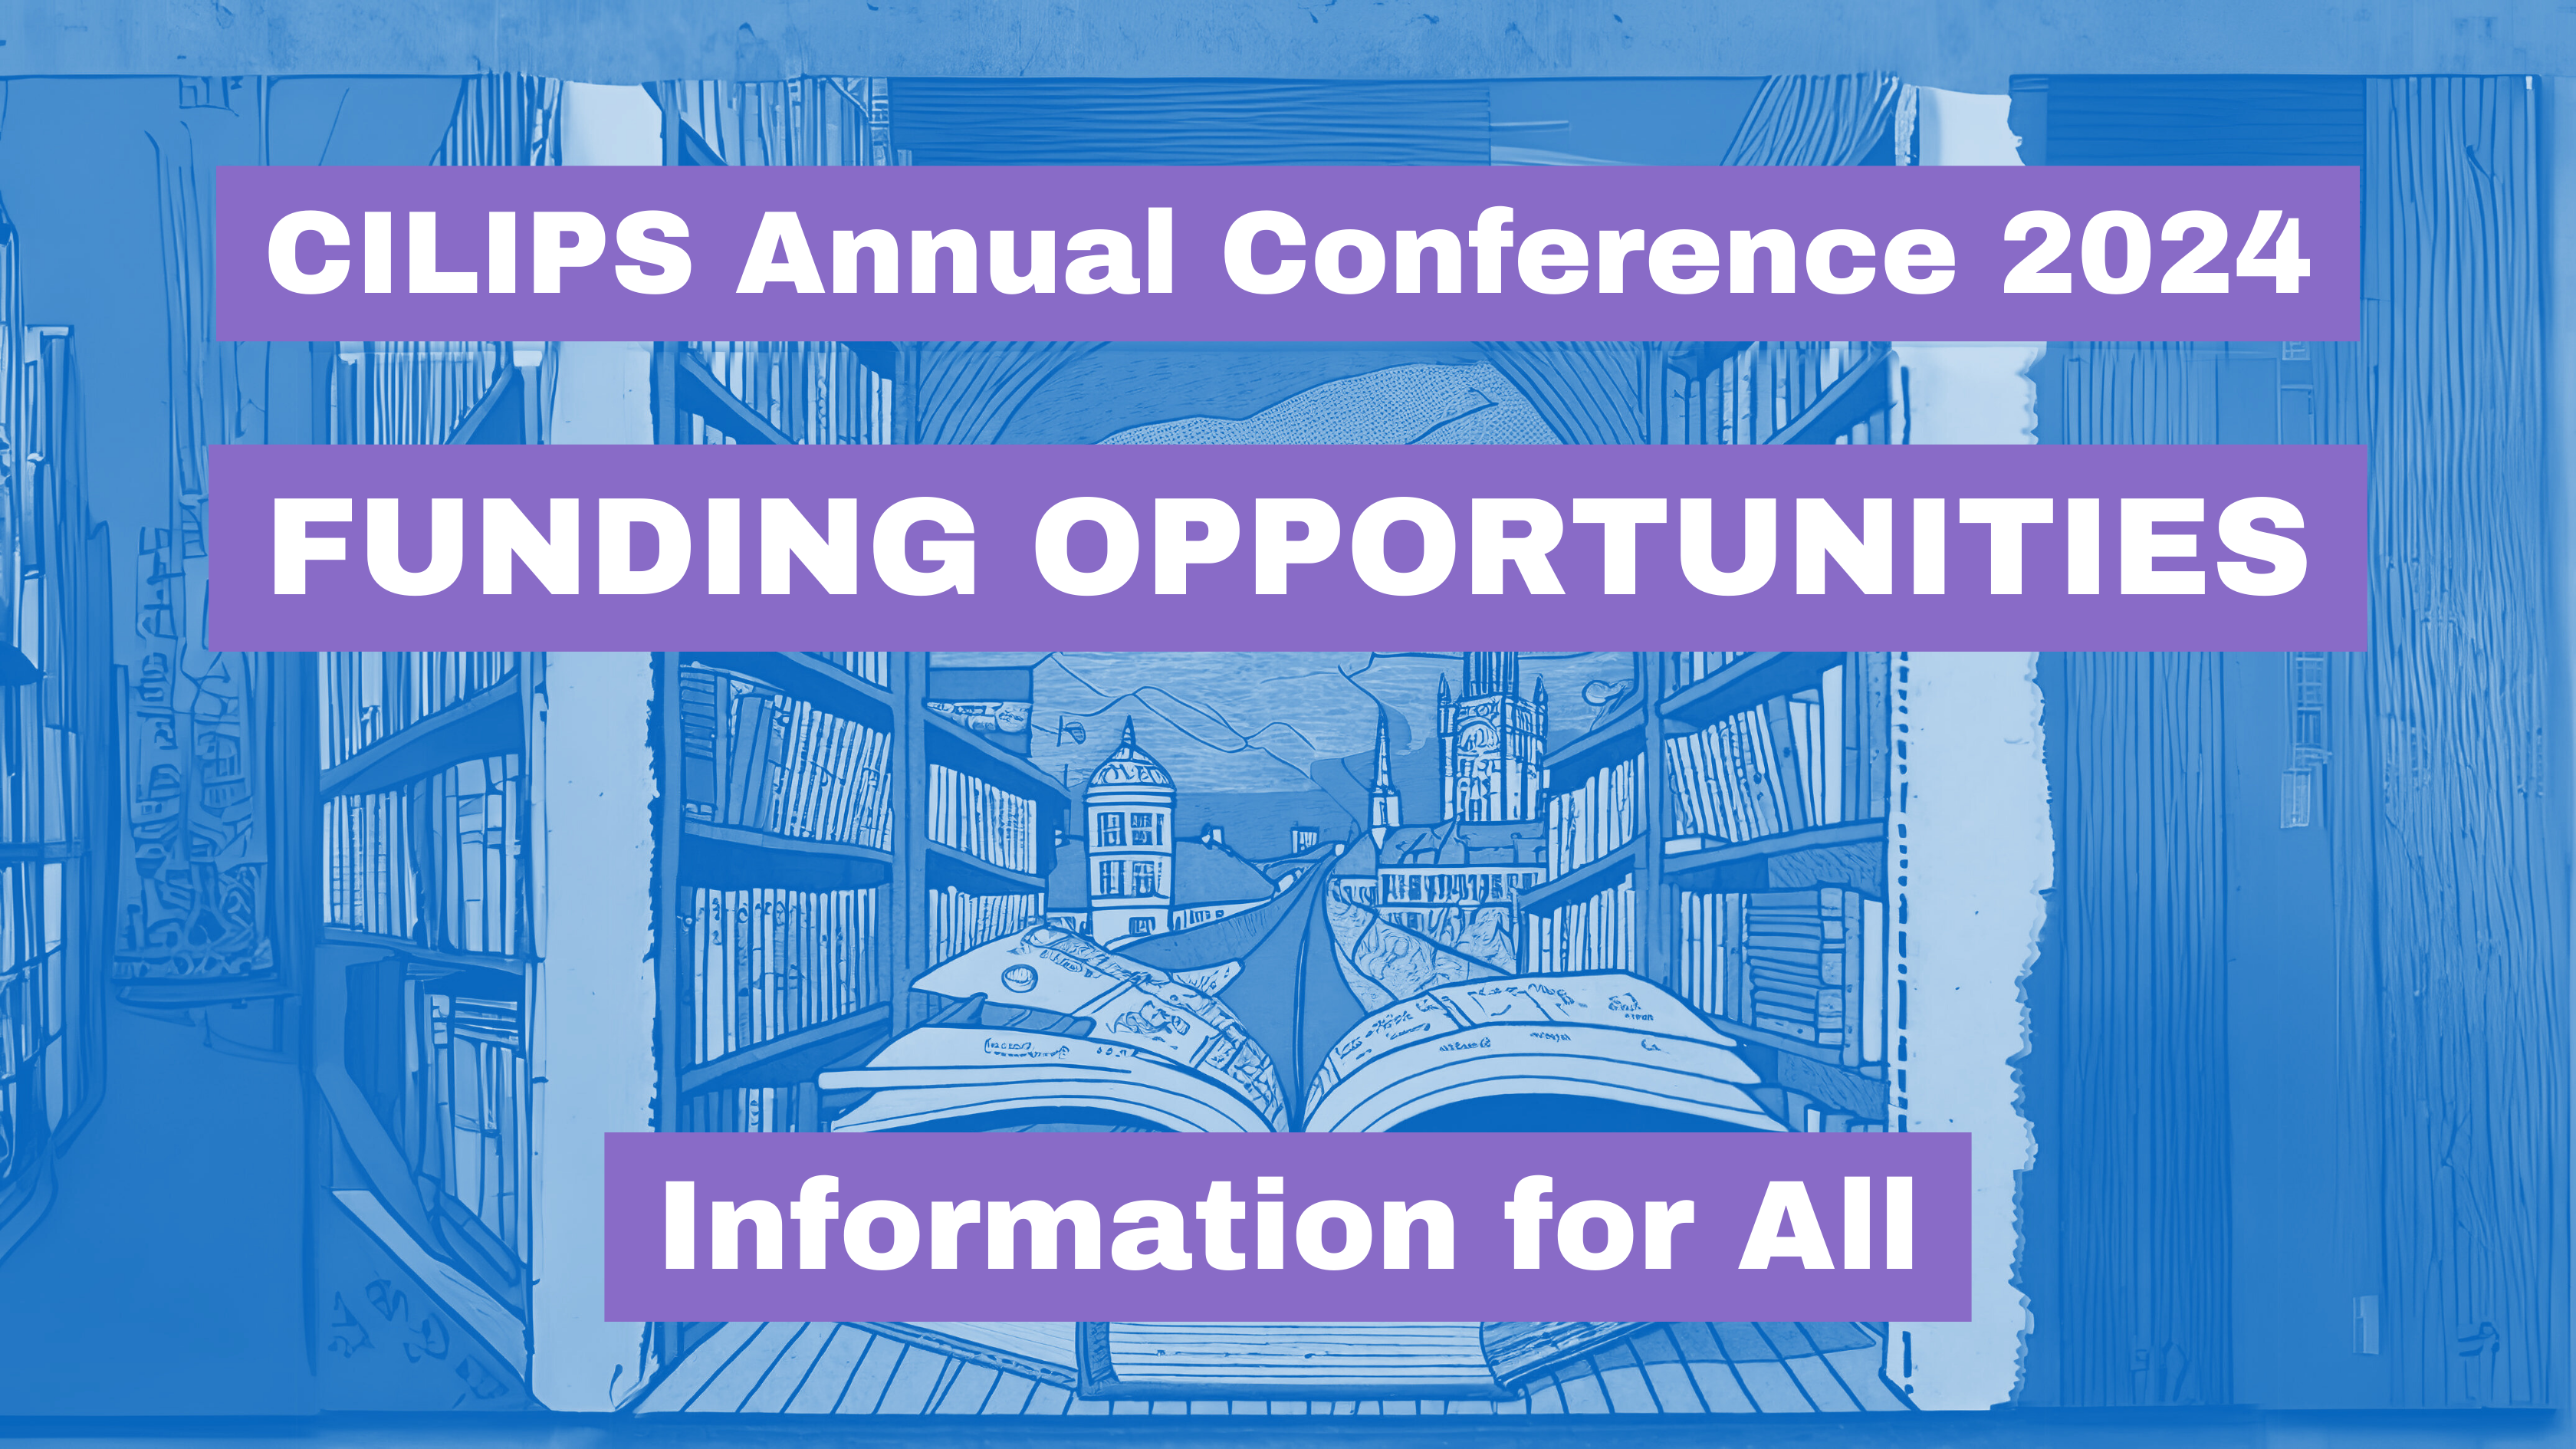 CILIPS Annual Conference 2024, Funding Opportunities, Information for All.